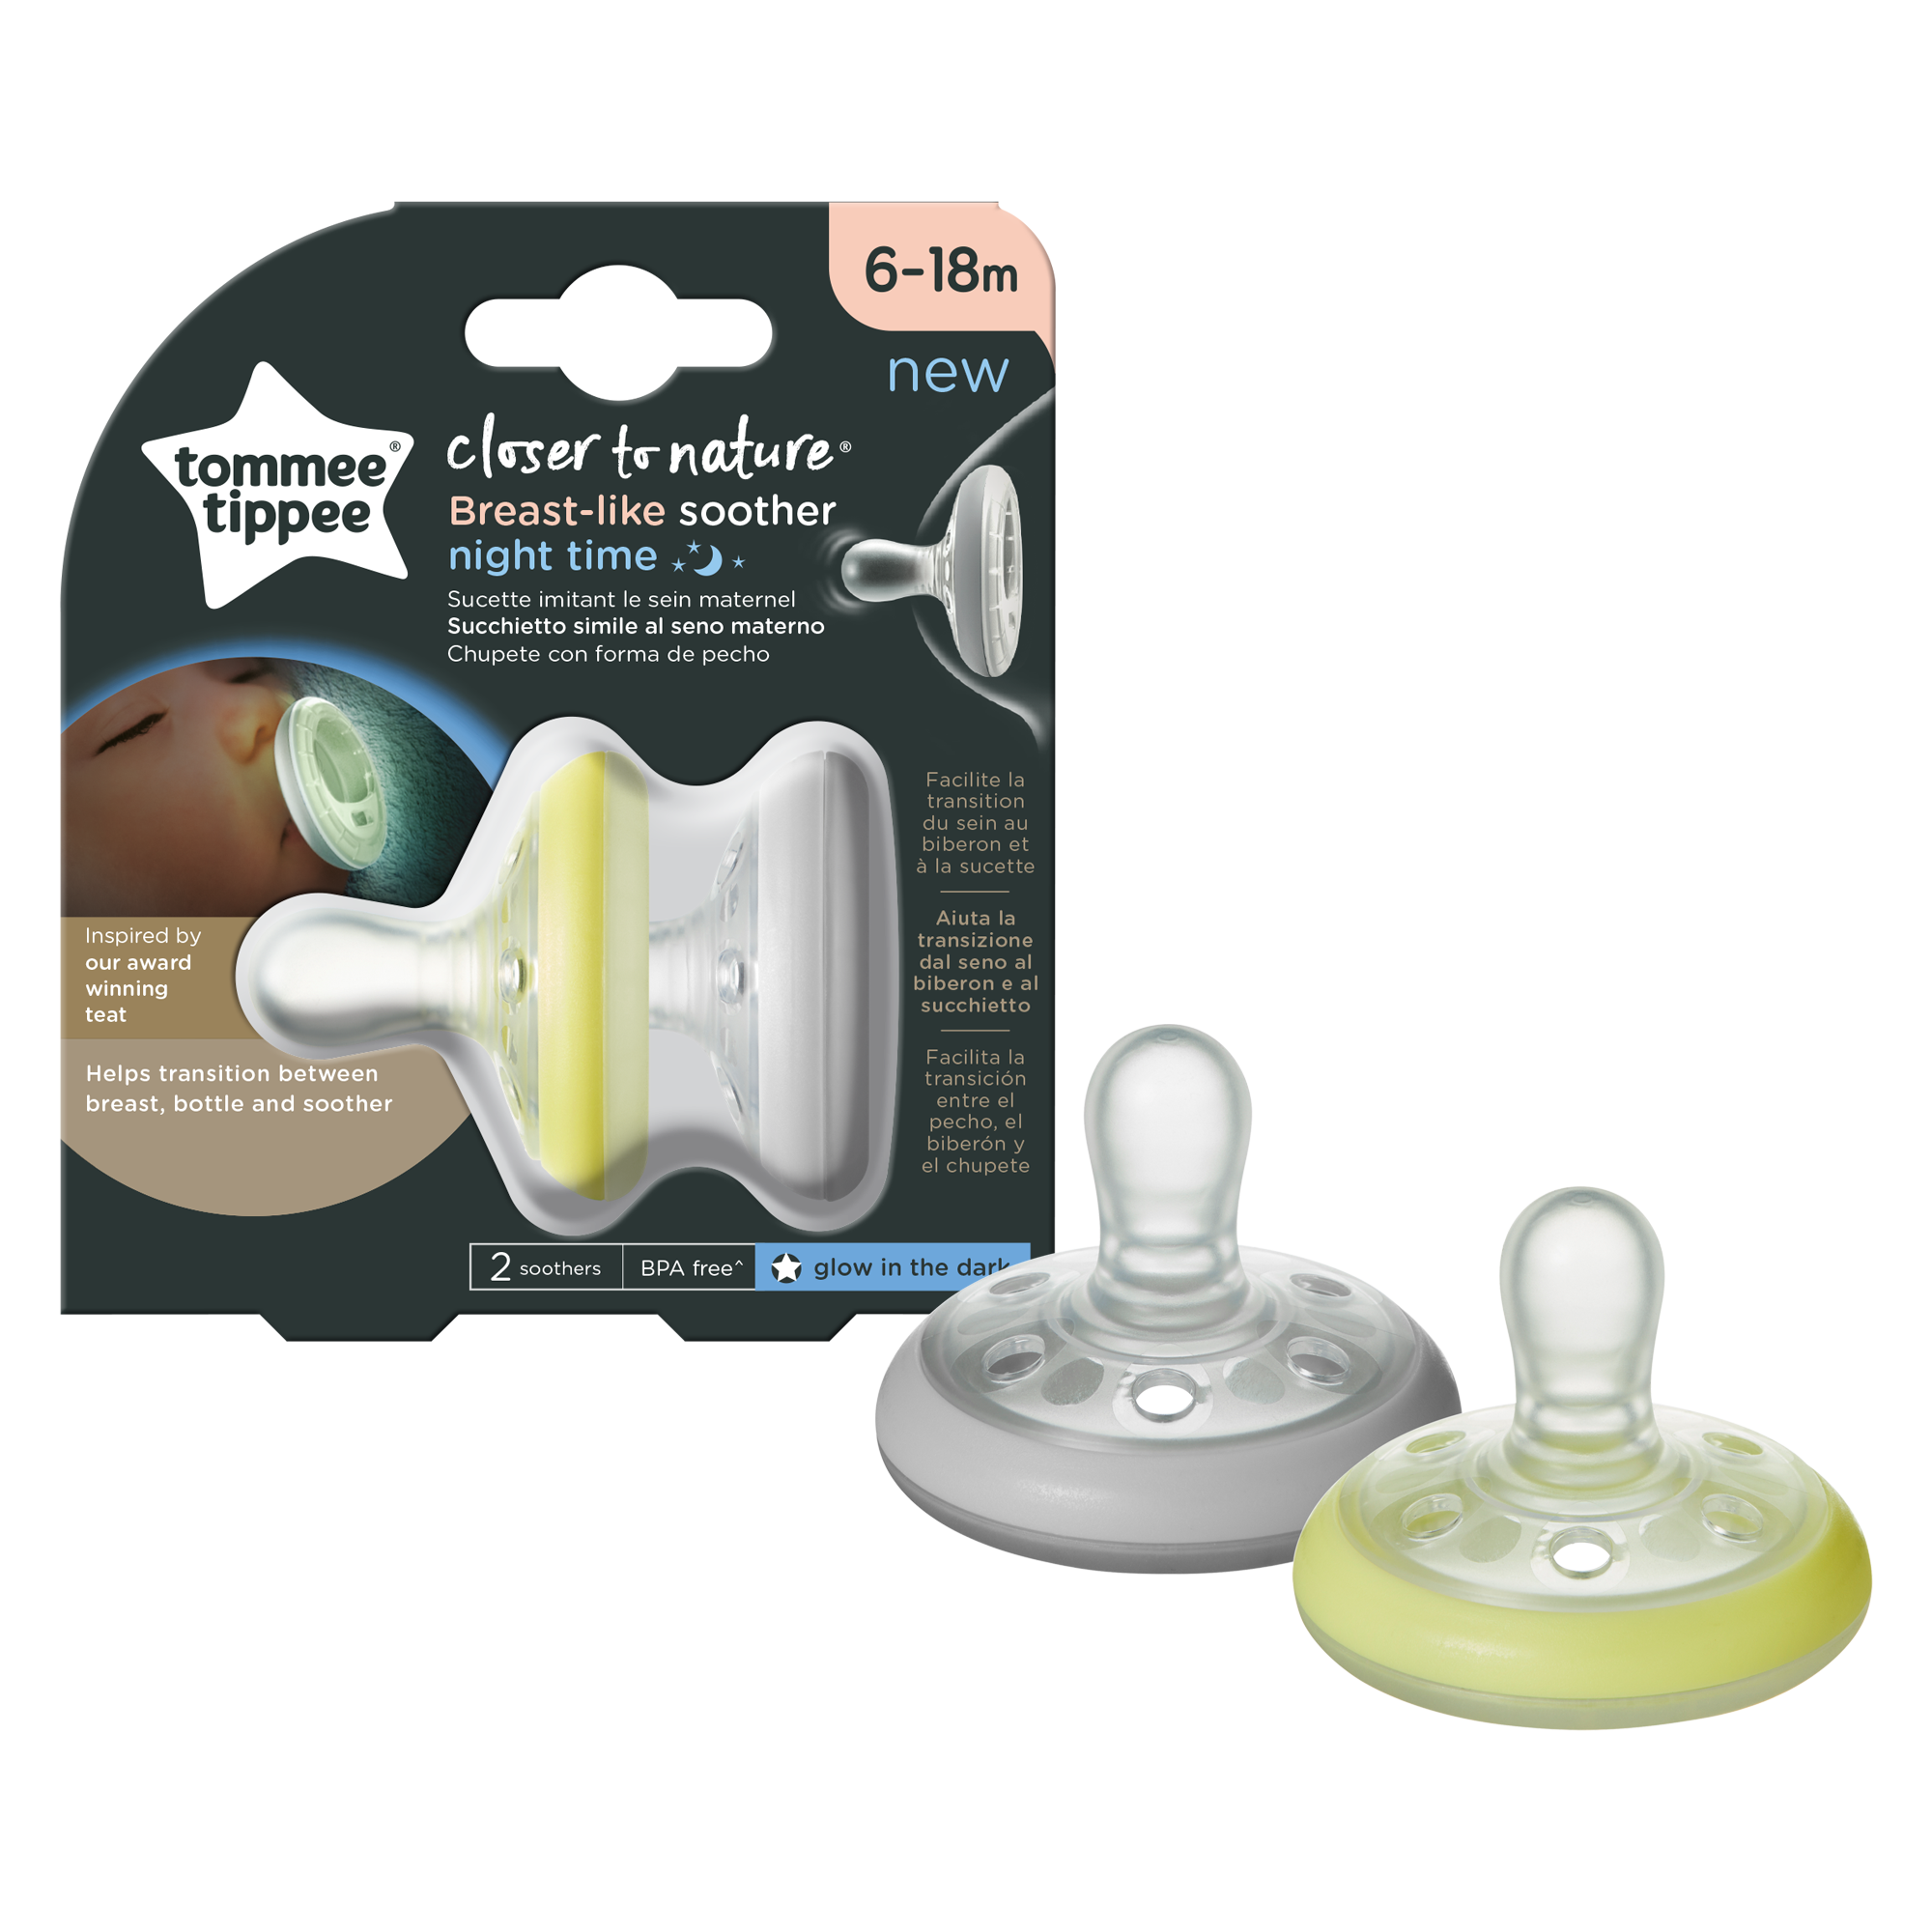 Suzeta de noapte Closer to Nature Breast like Soother, 6-18 luni, 2 bucati, Alb/Galben, Tommee Tippee